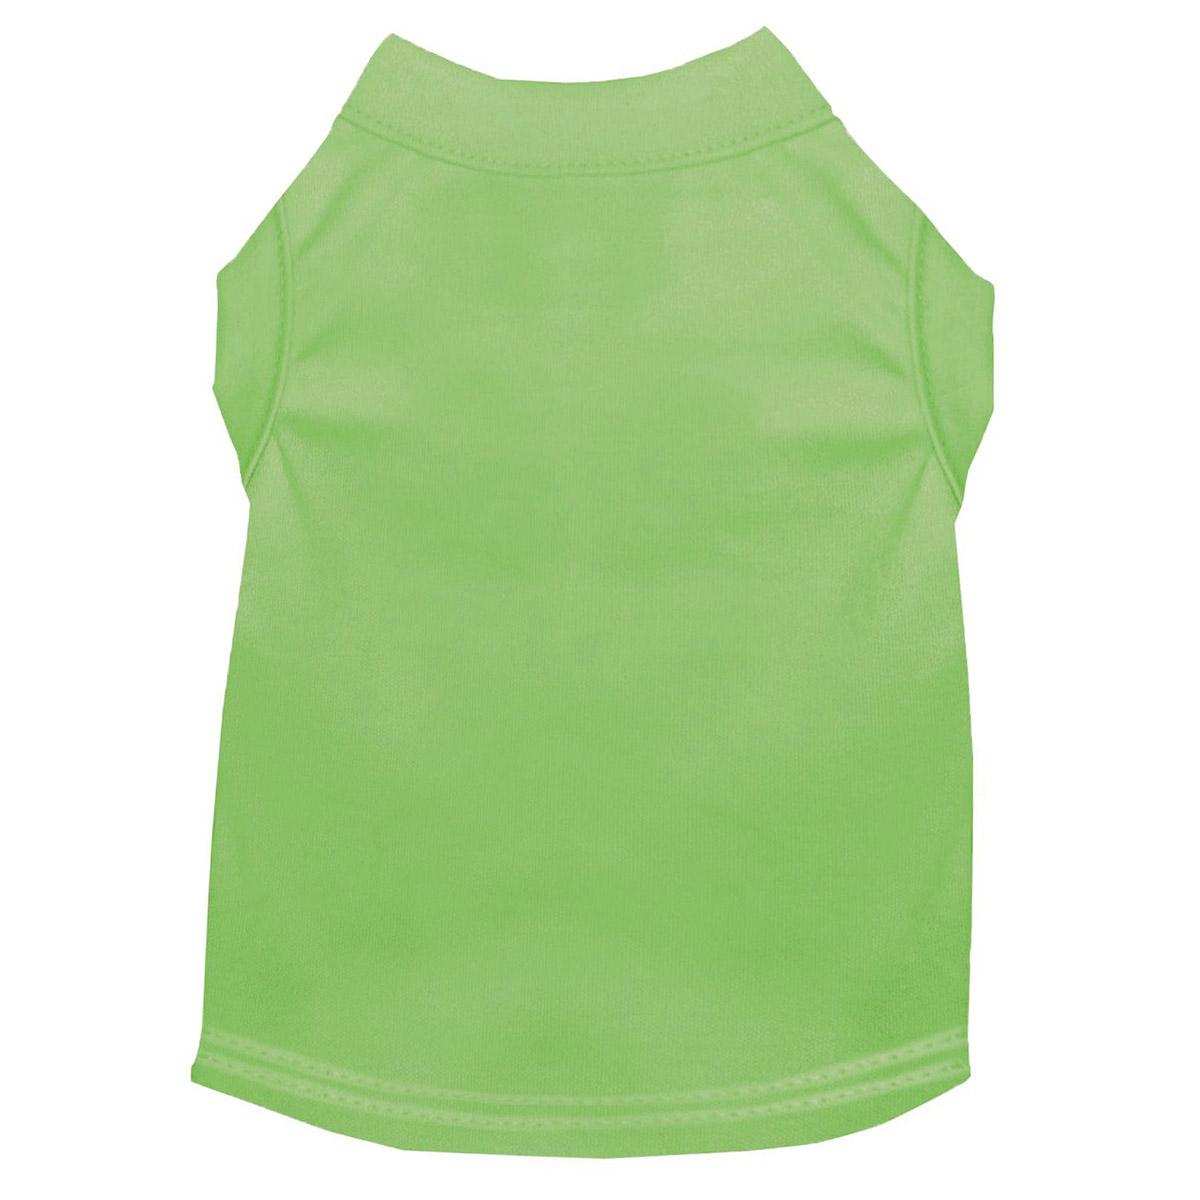 Plain Dog and Cat Shirt - Lime Green